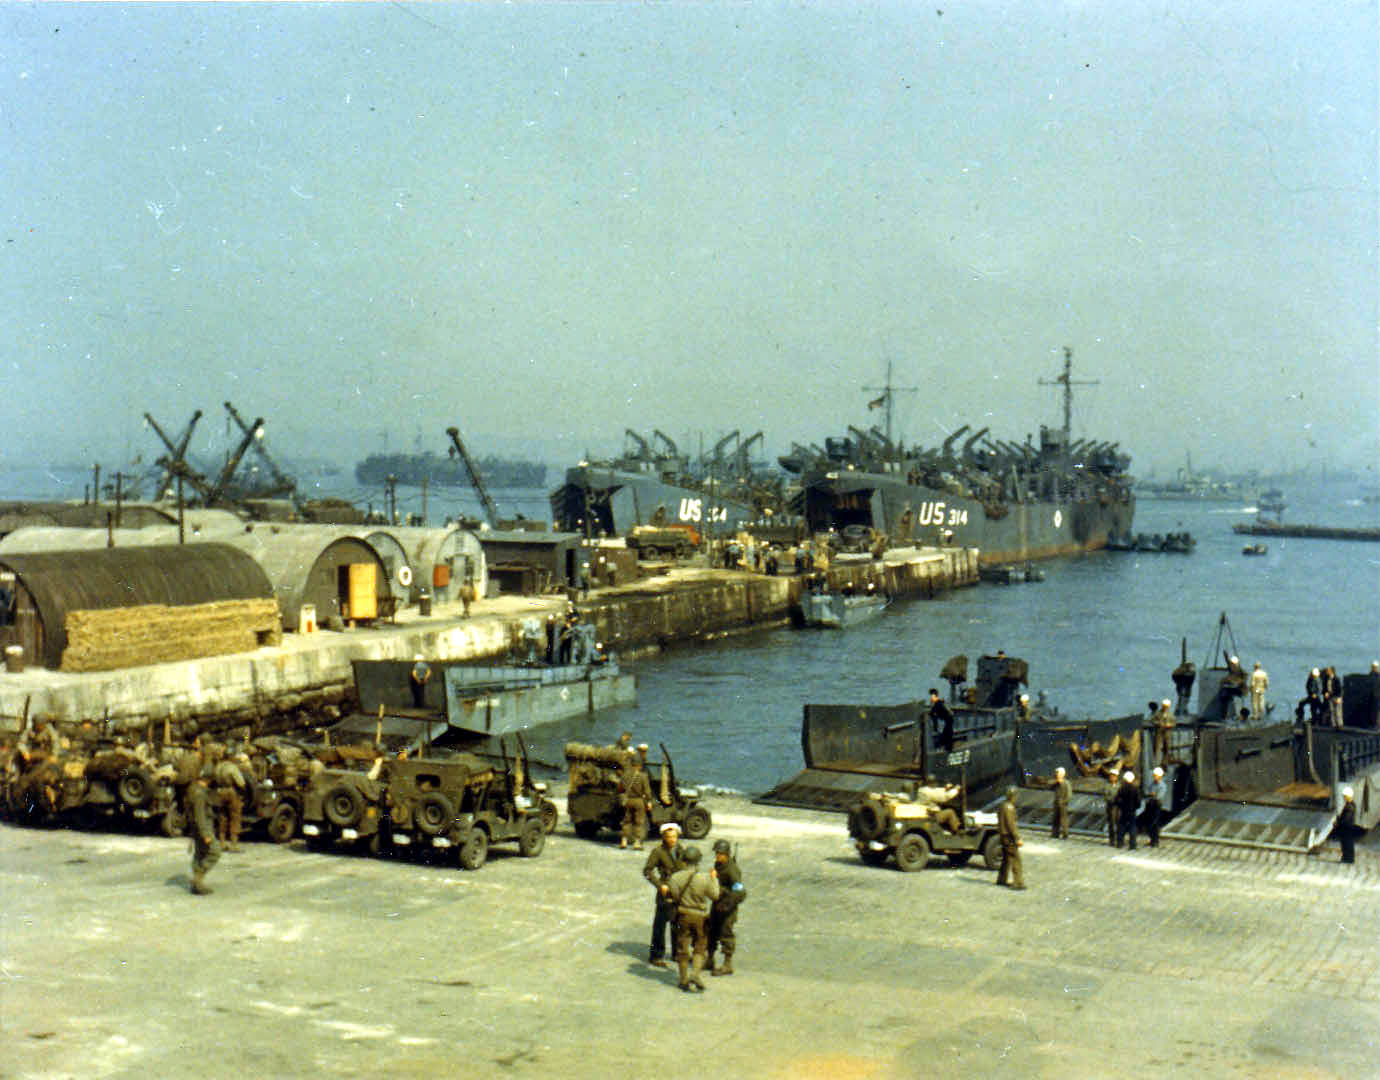 Preparations for D-Day